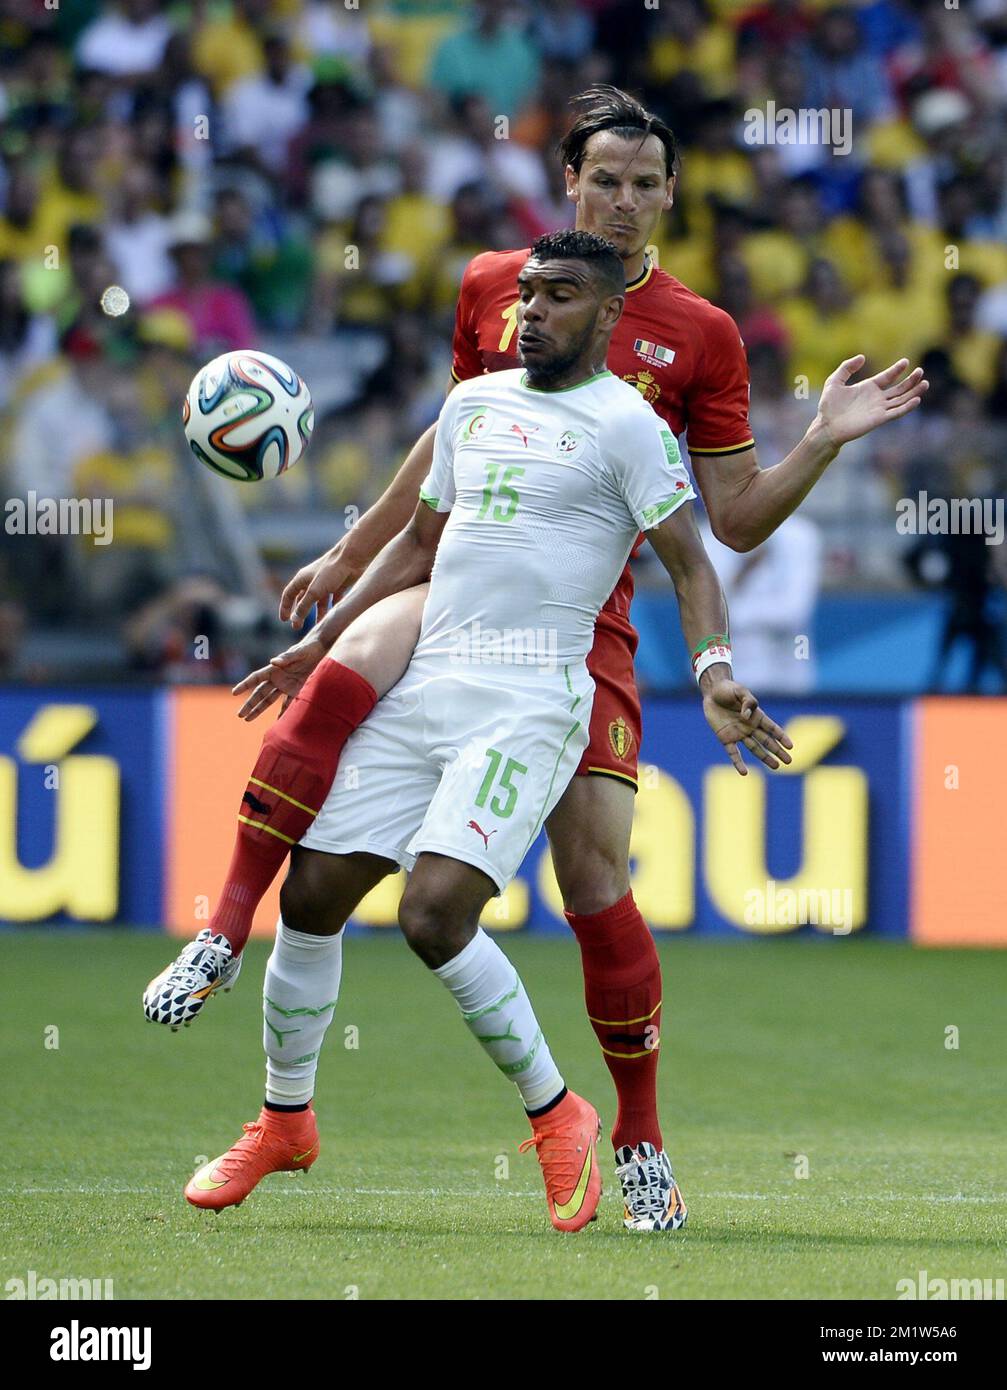 Algeria's El Arbi Hillel Soudani and Belgium's Daniel Van Buyten pictured in action during a soccer game between Belgian national team The Red Devils and Algeria in Belo Horizonte, Brazil, the first game in Group H of the first round of the 2014 FIFA World Cup, Tuesday 17 June 2014.  Stock Photo